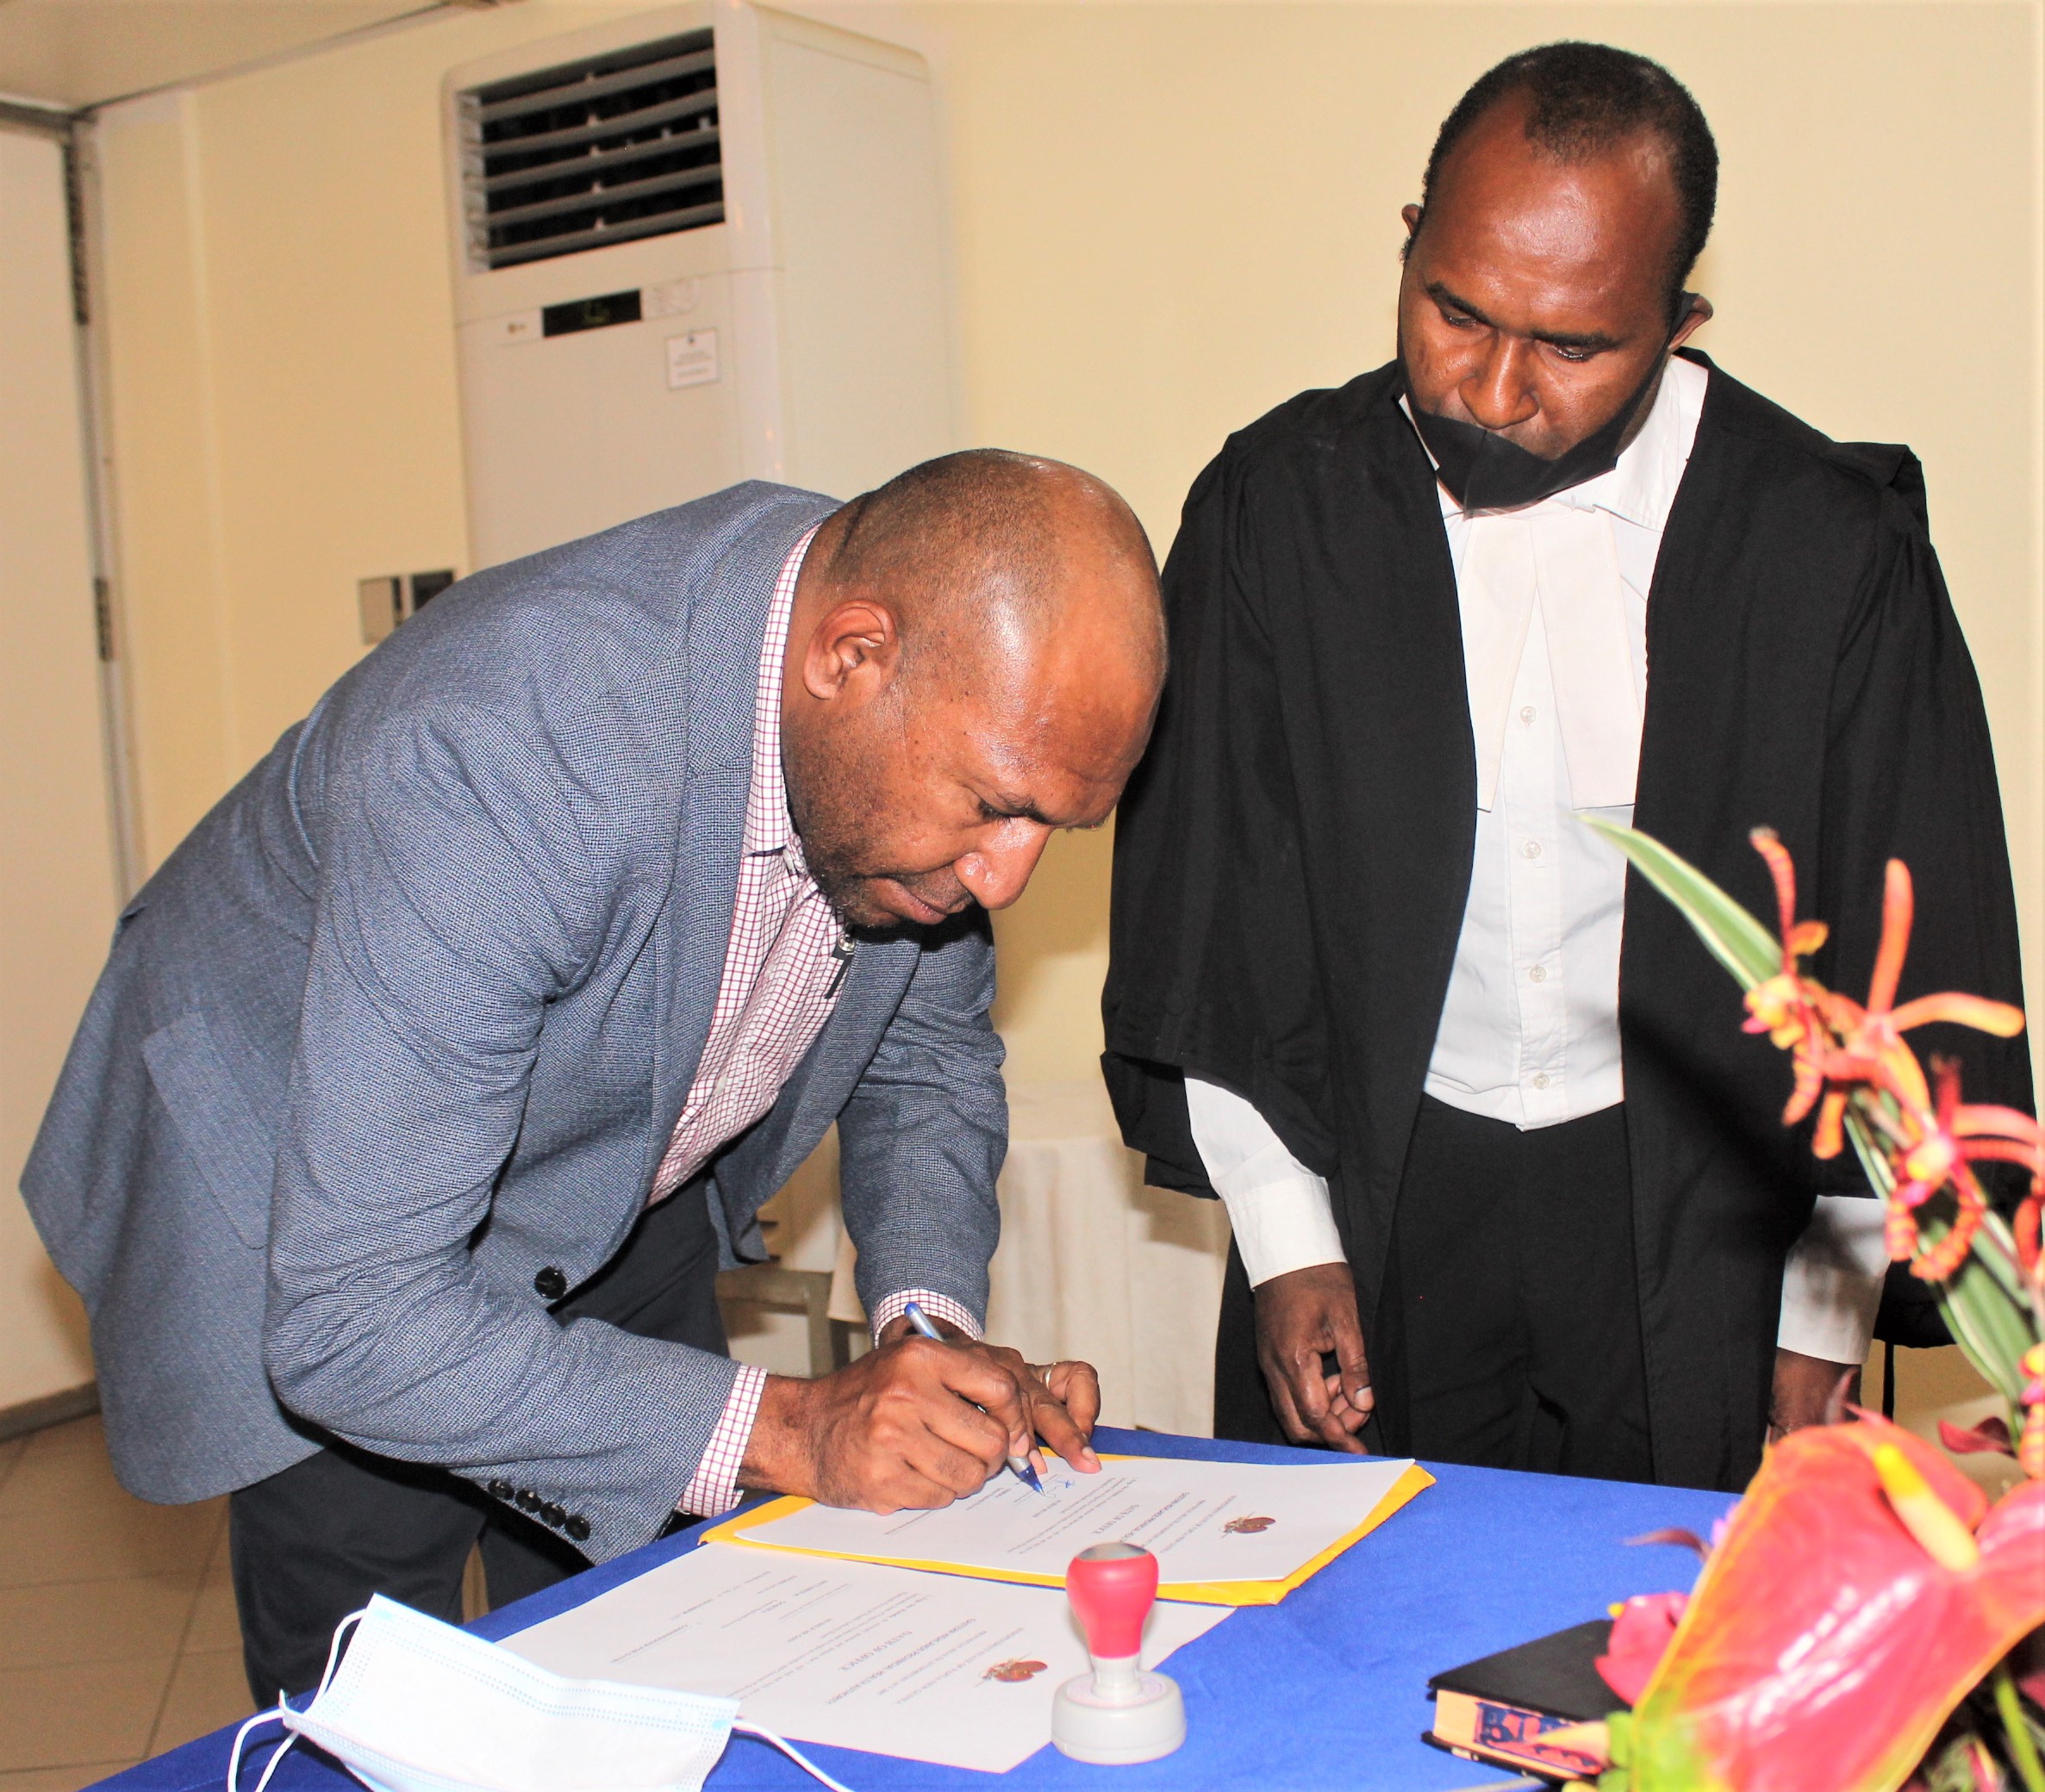 Legal officer of the National Department of health Steven Jolawara witnessed the swearing-in of Fego Otta Kiniafa signing legal instruments as the new Chairman for the Eastern Highlands Provincial Health Authority